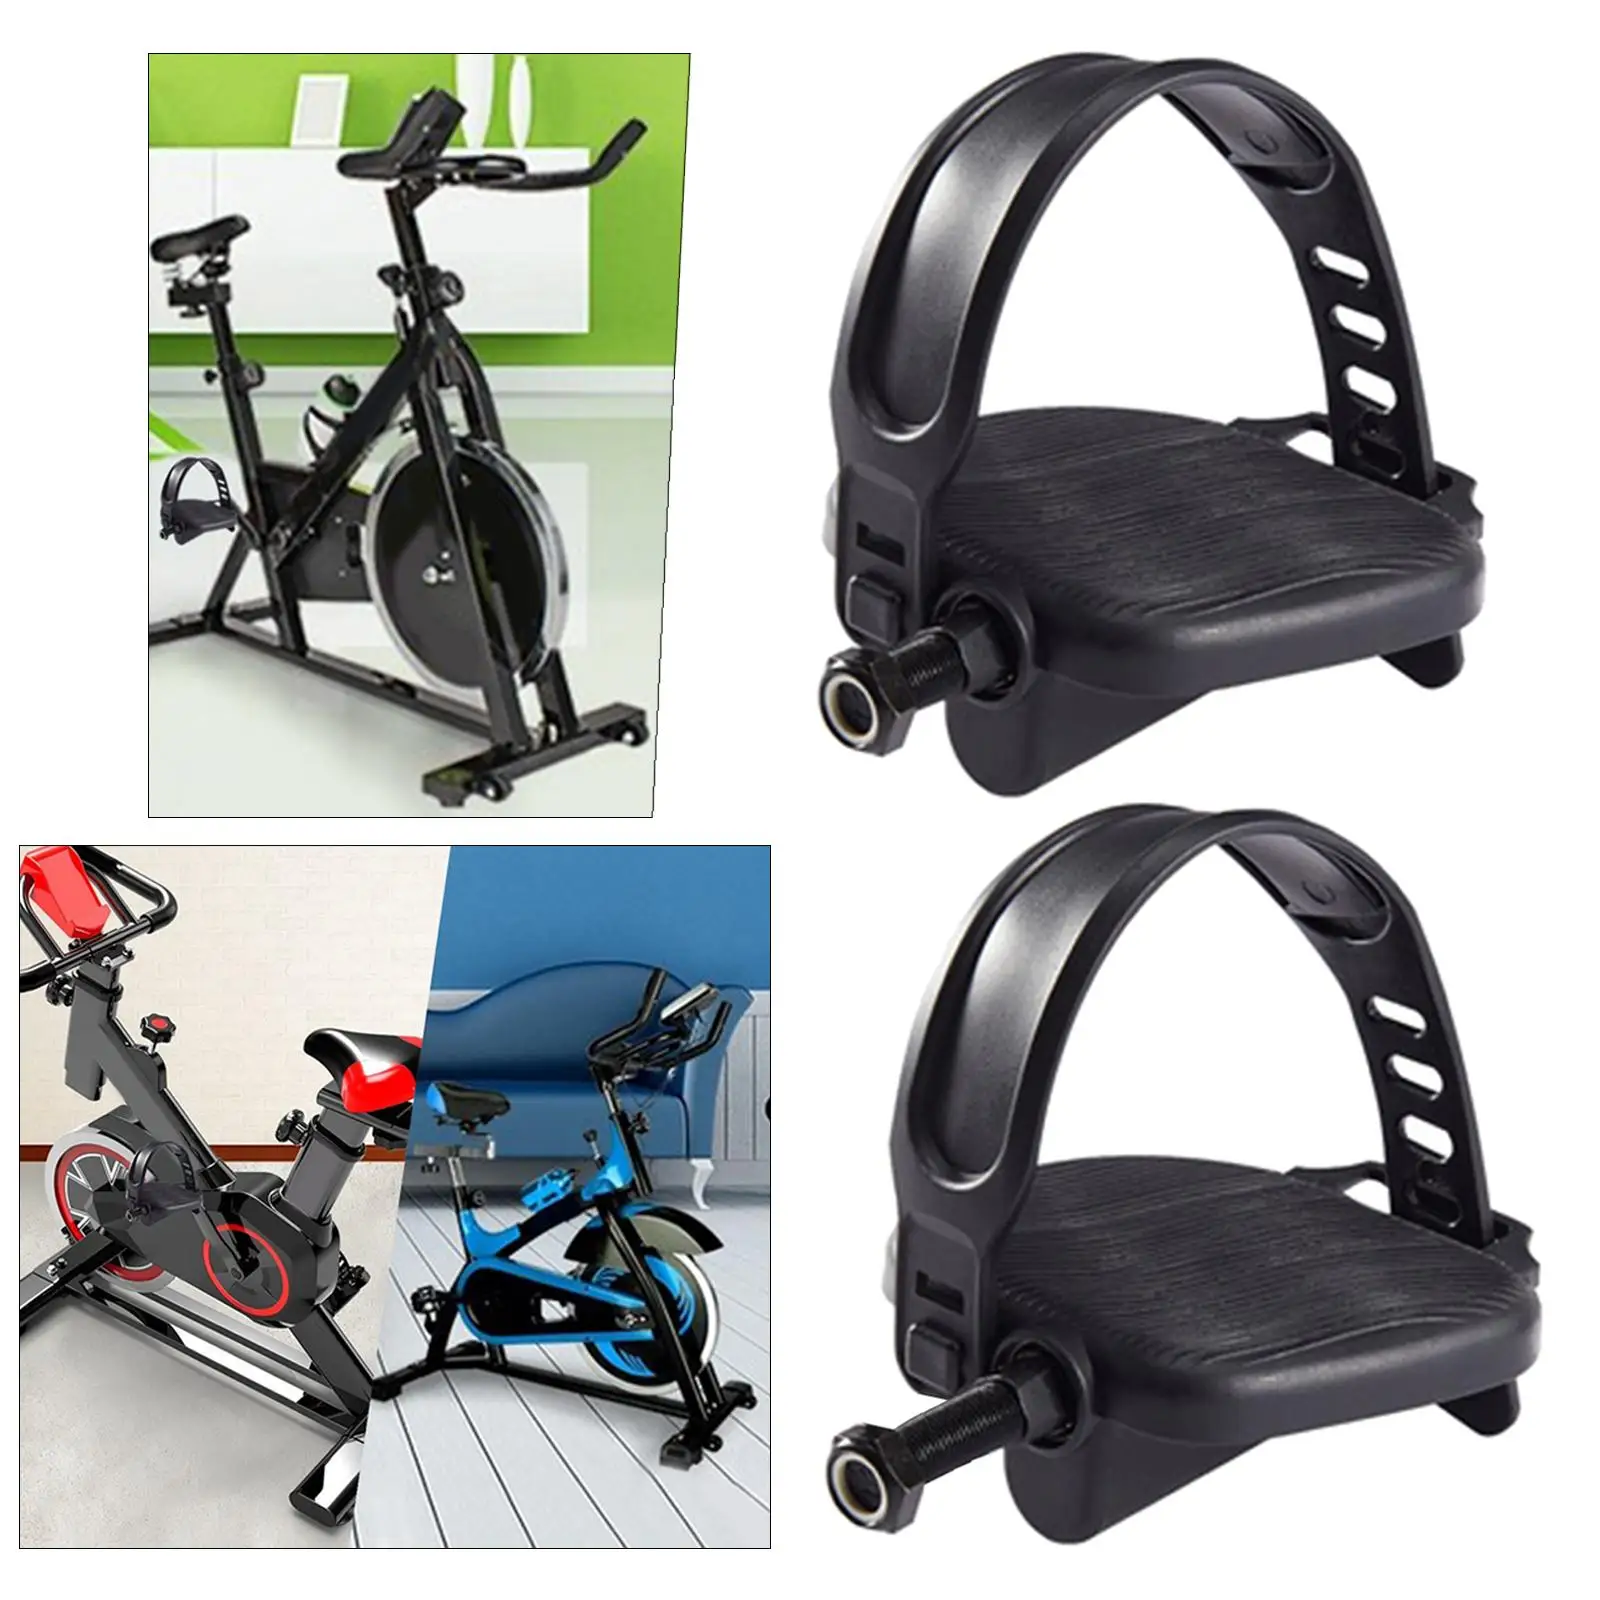 1 Pair Exercise Bike Pedals with Straps Indoor Home Gym Cycling Parts Replacement Fitness Equipment Accessories Bicycle Pedal